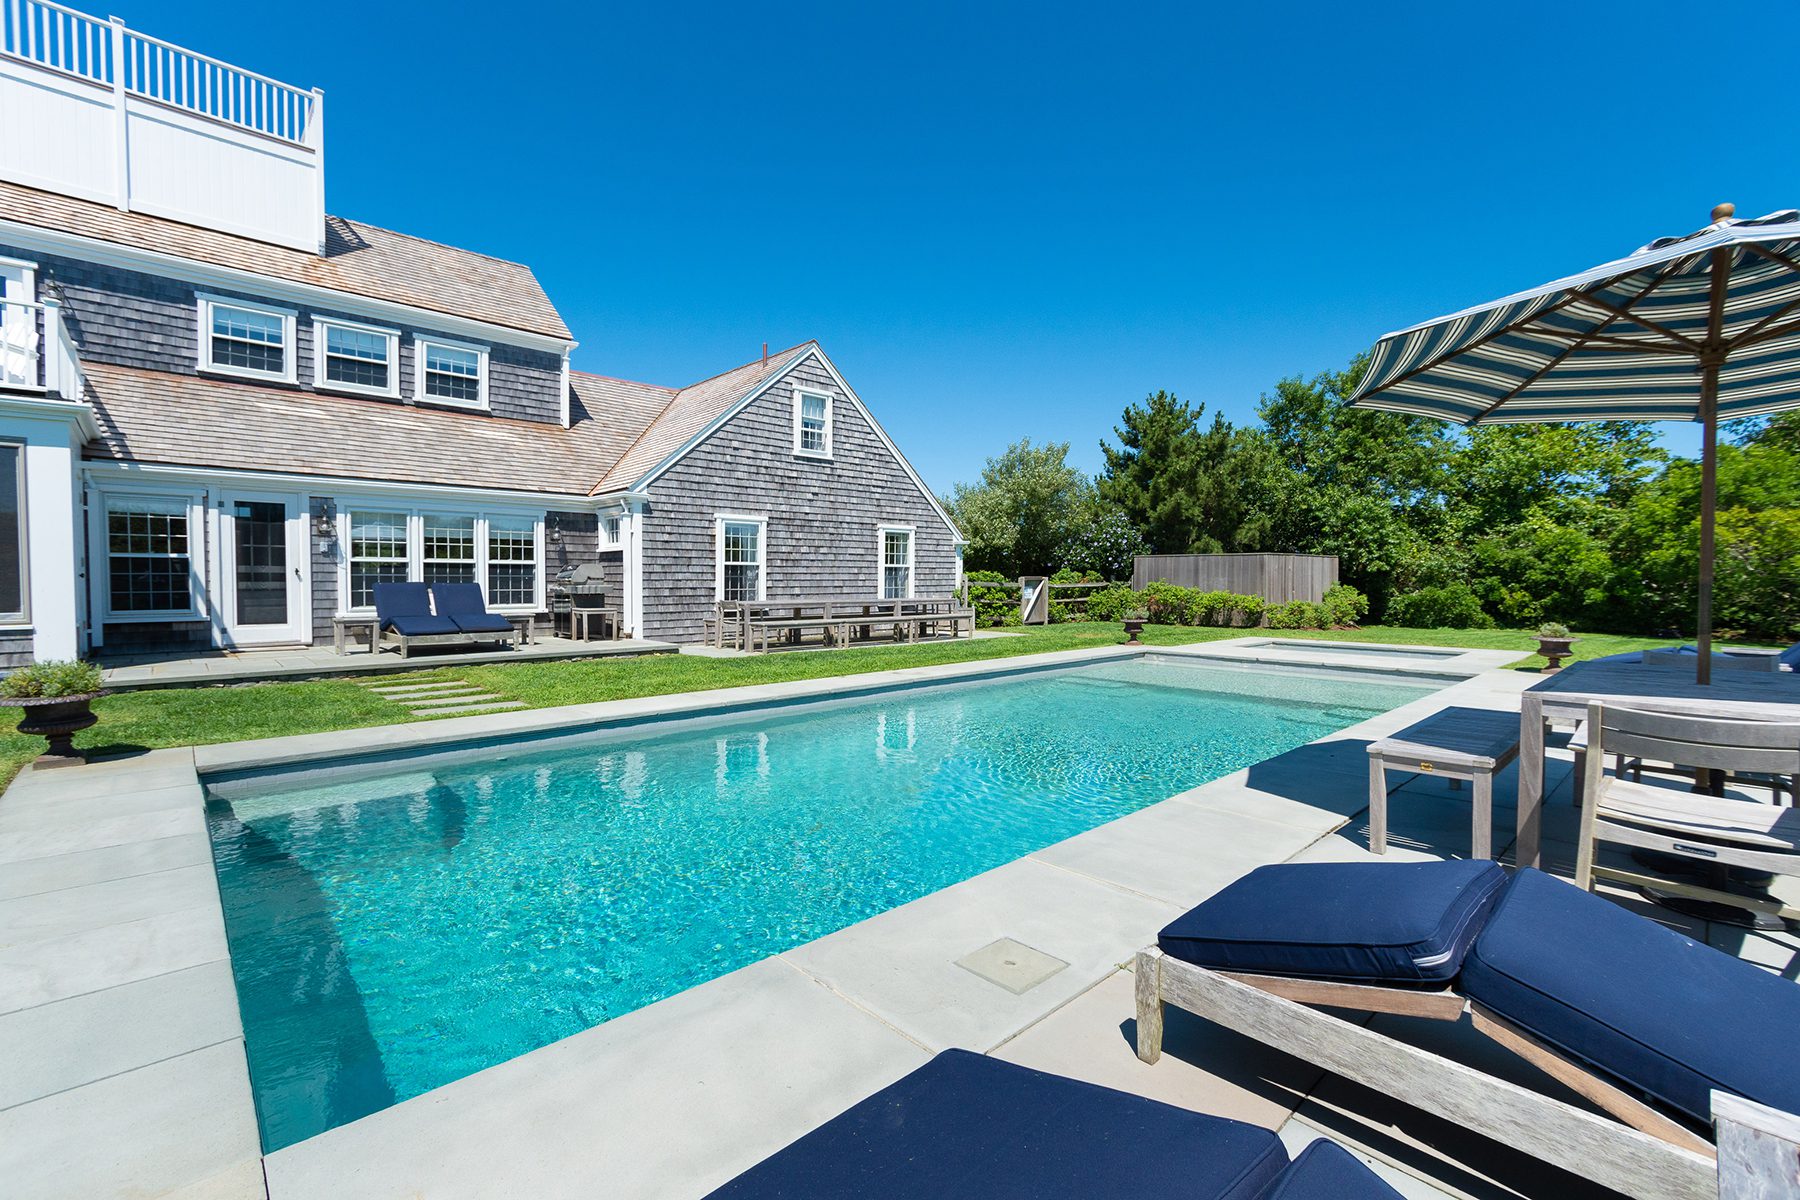 8-21 Quidnet Rd Nantucket Family Compound Tennis Pool Pickleball